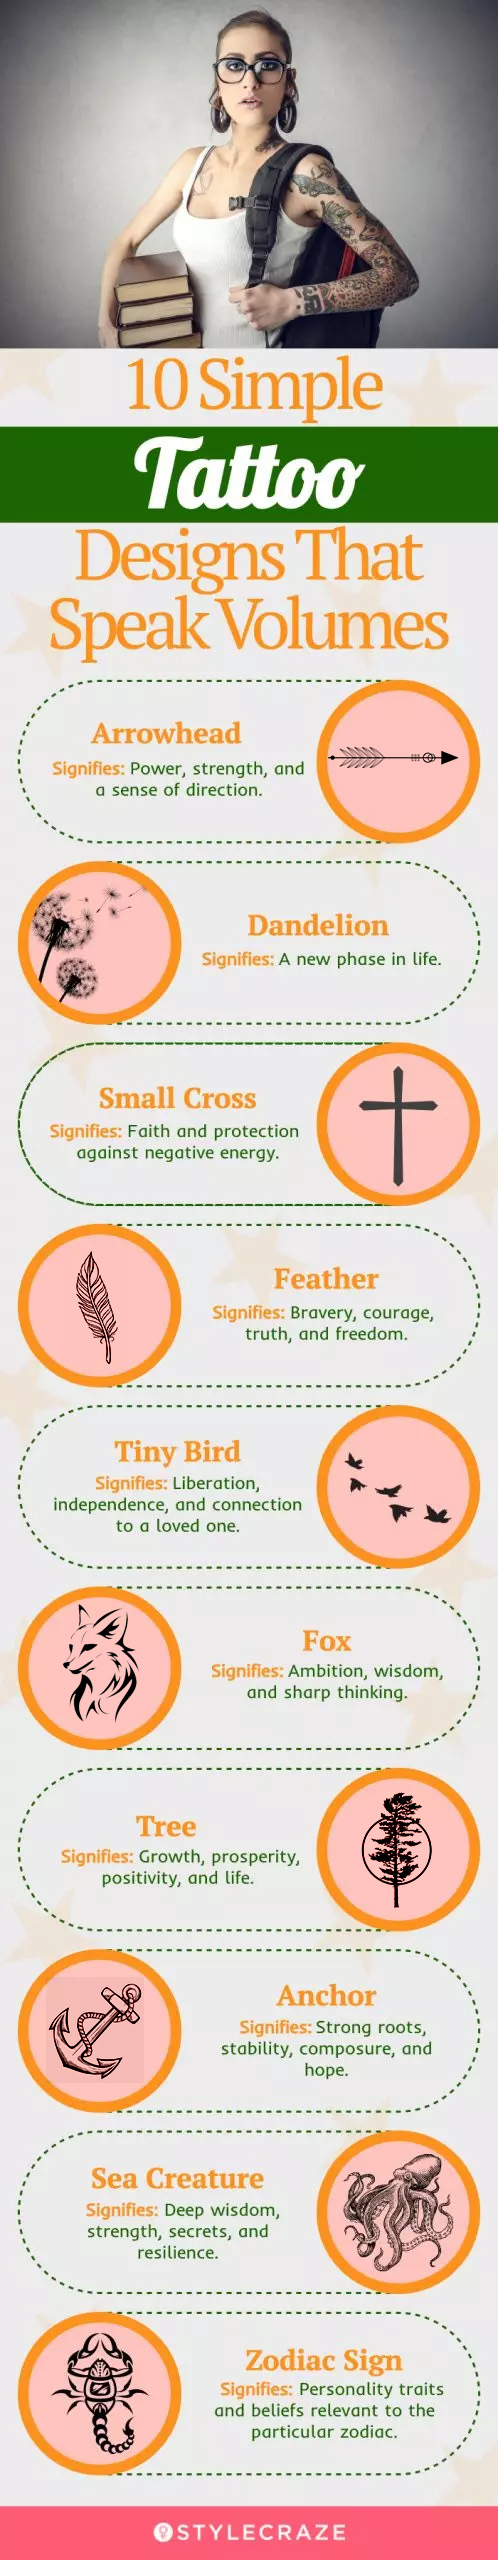 10 simple tattoo objects that speak volumes (infographic)